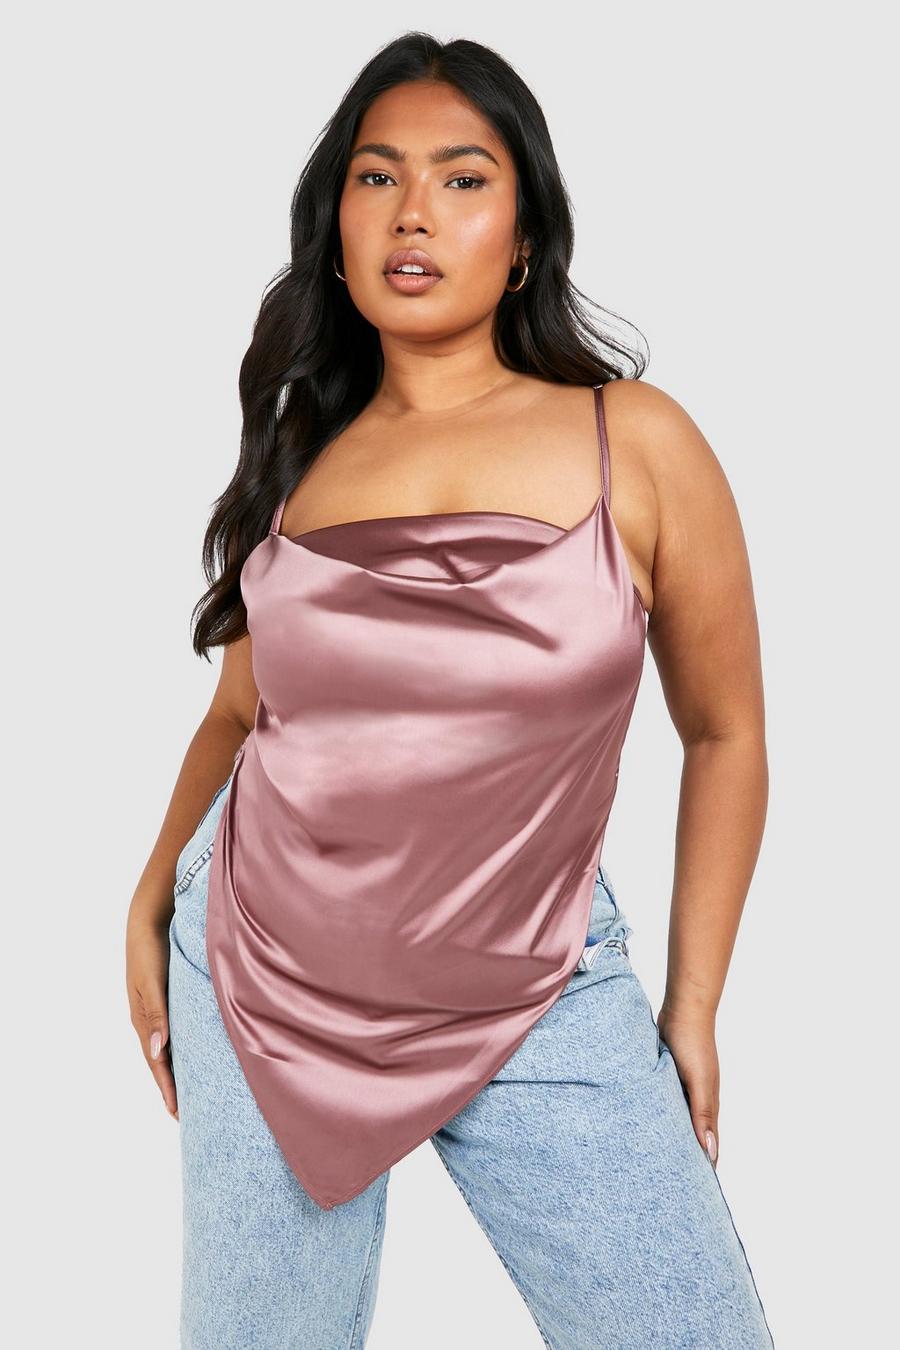 MONYRAY Women Plus Size Tank Cotton Plus Size Tank Tops with Padded Bras  Light Pink 2X